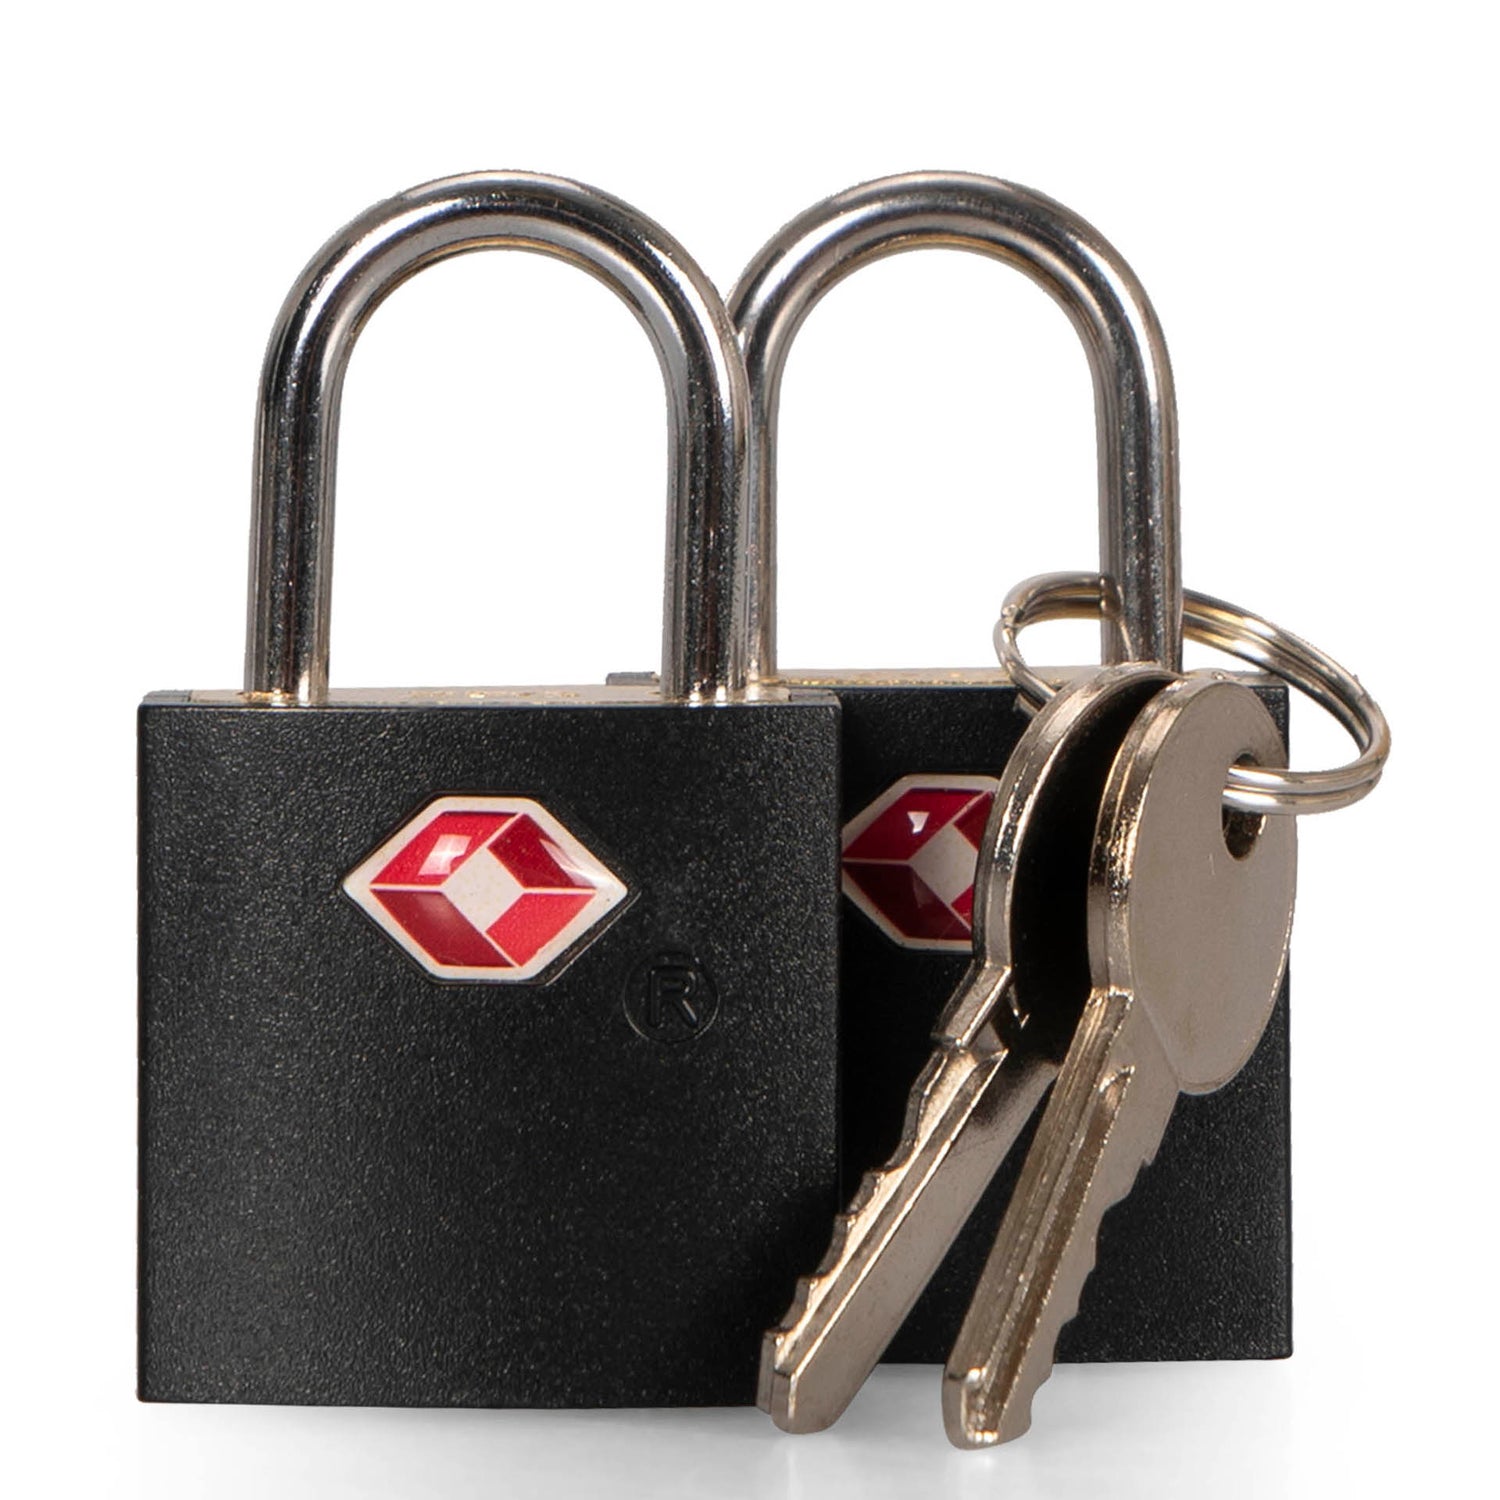 2 closed locks attached to 2 keys with the TSA logo on the front of the locks with white background.